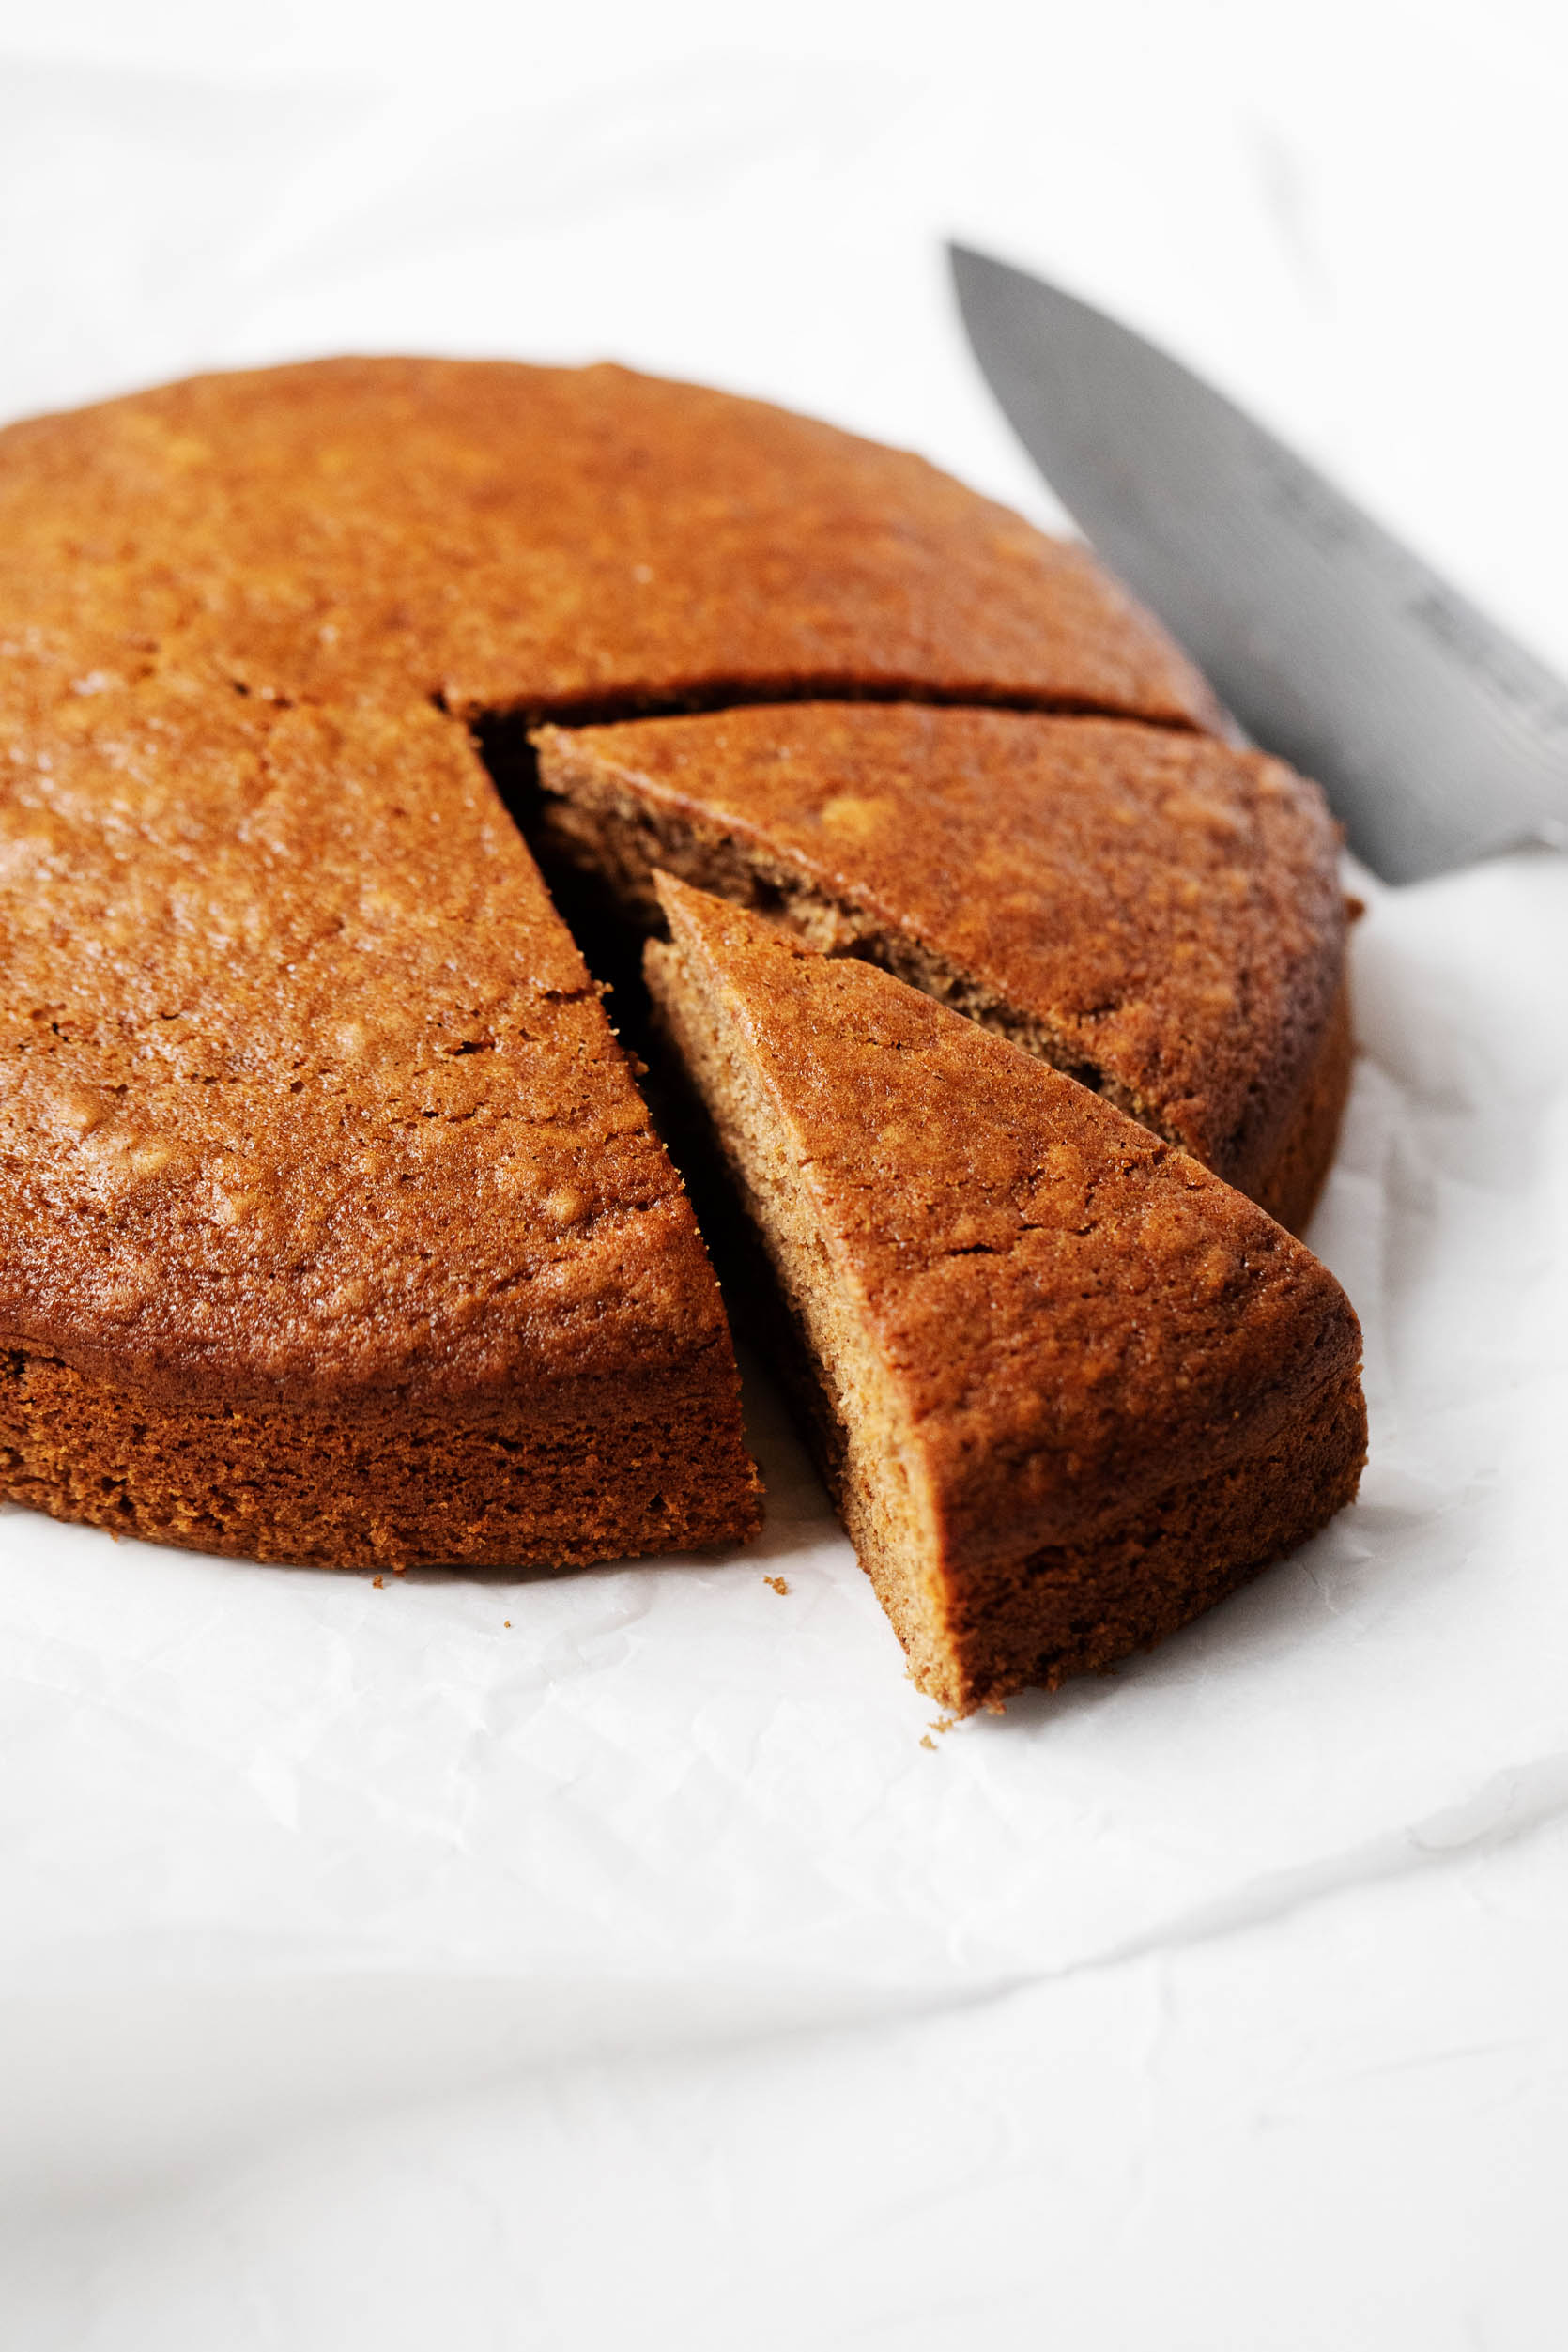 A round, golden brown gingerbread cake is being cut into slices.